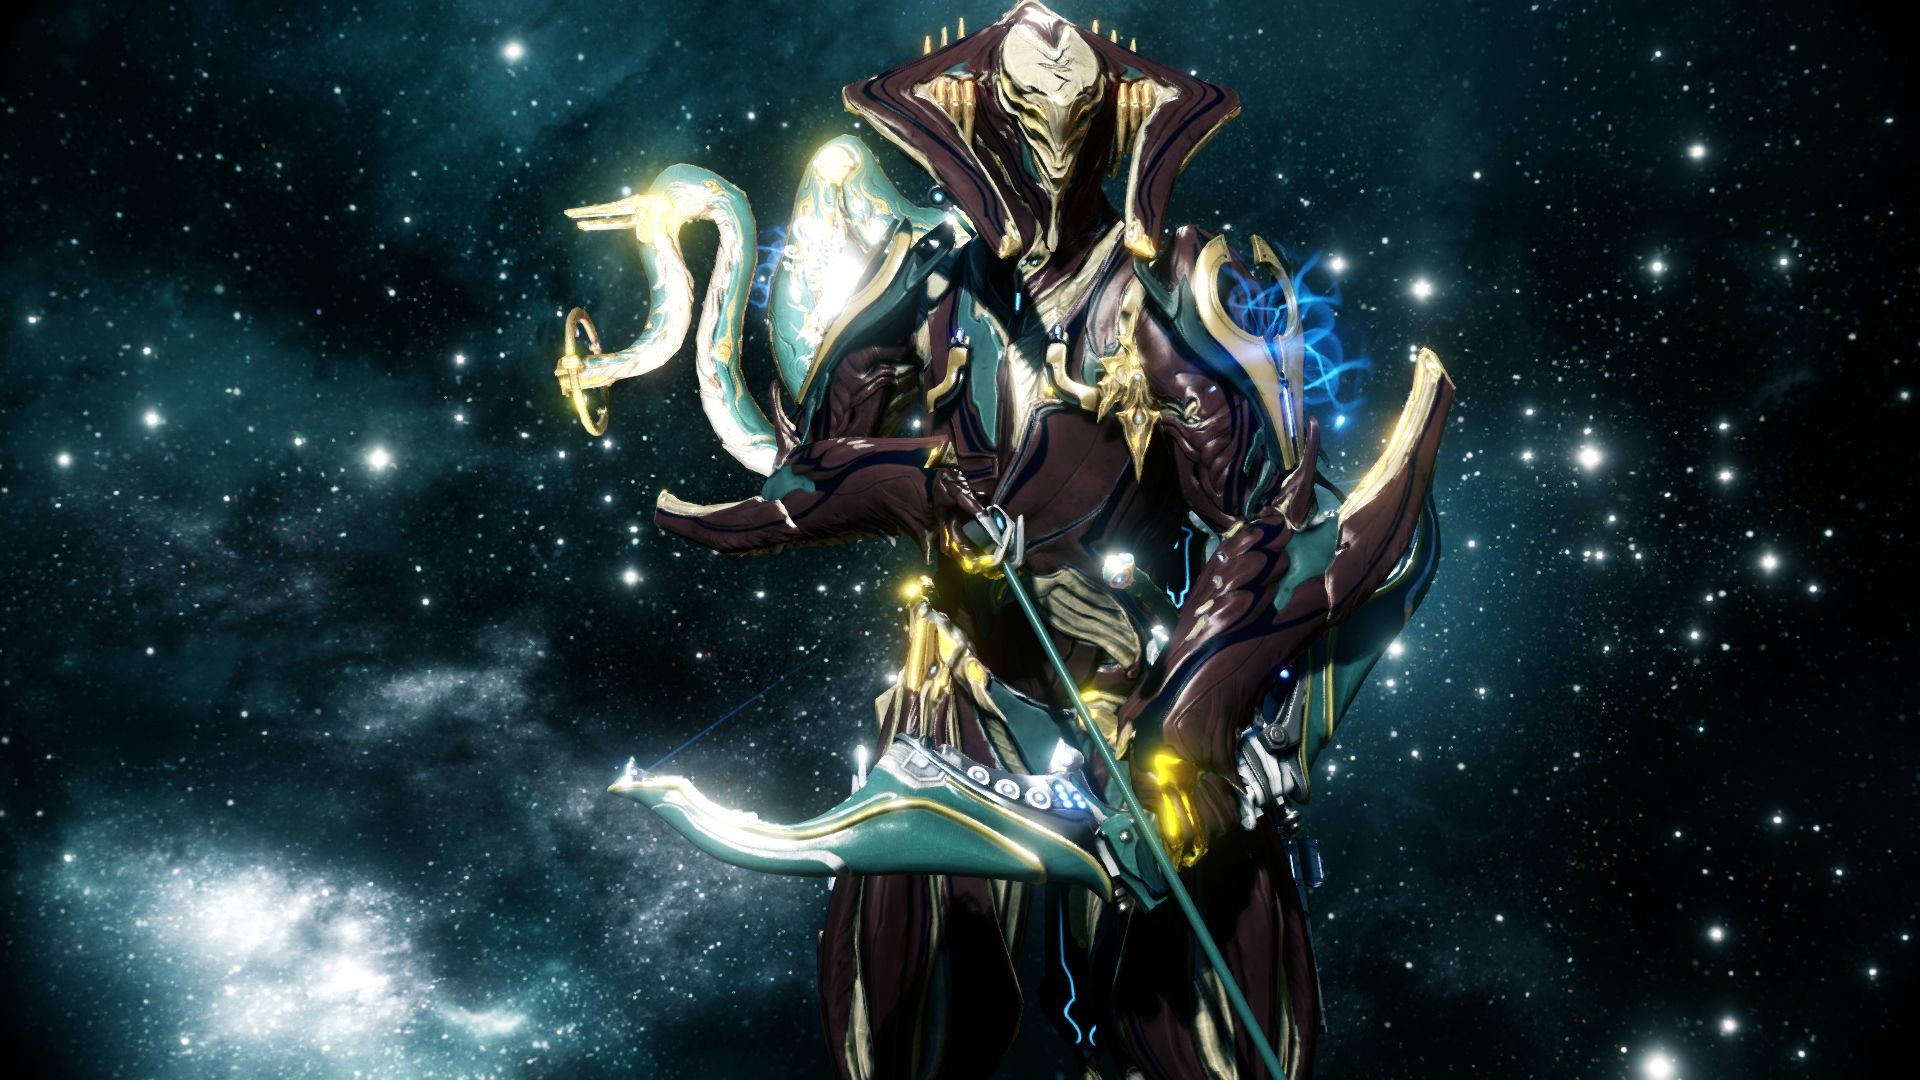 1920x1080 Inconsistent Gold Material On Loki Prime